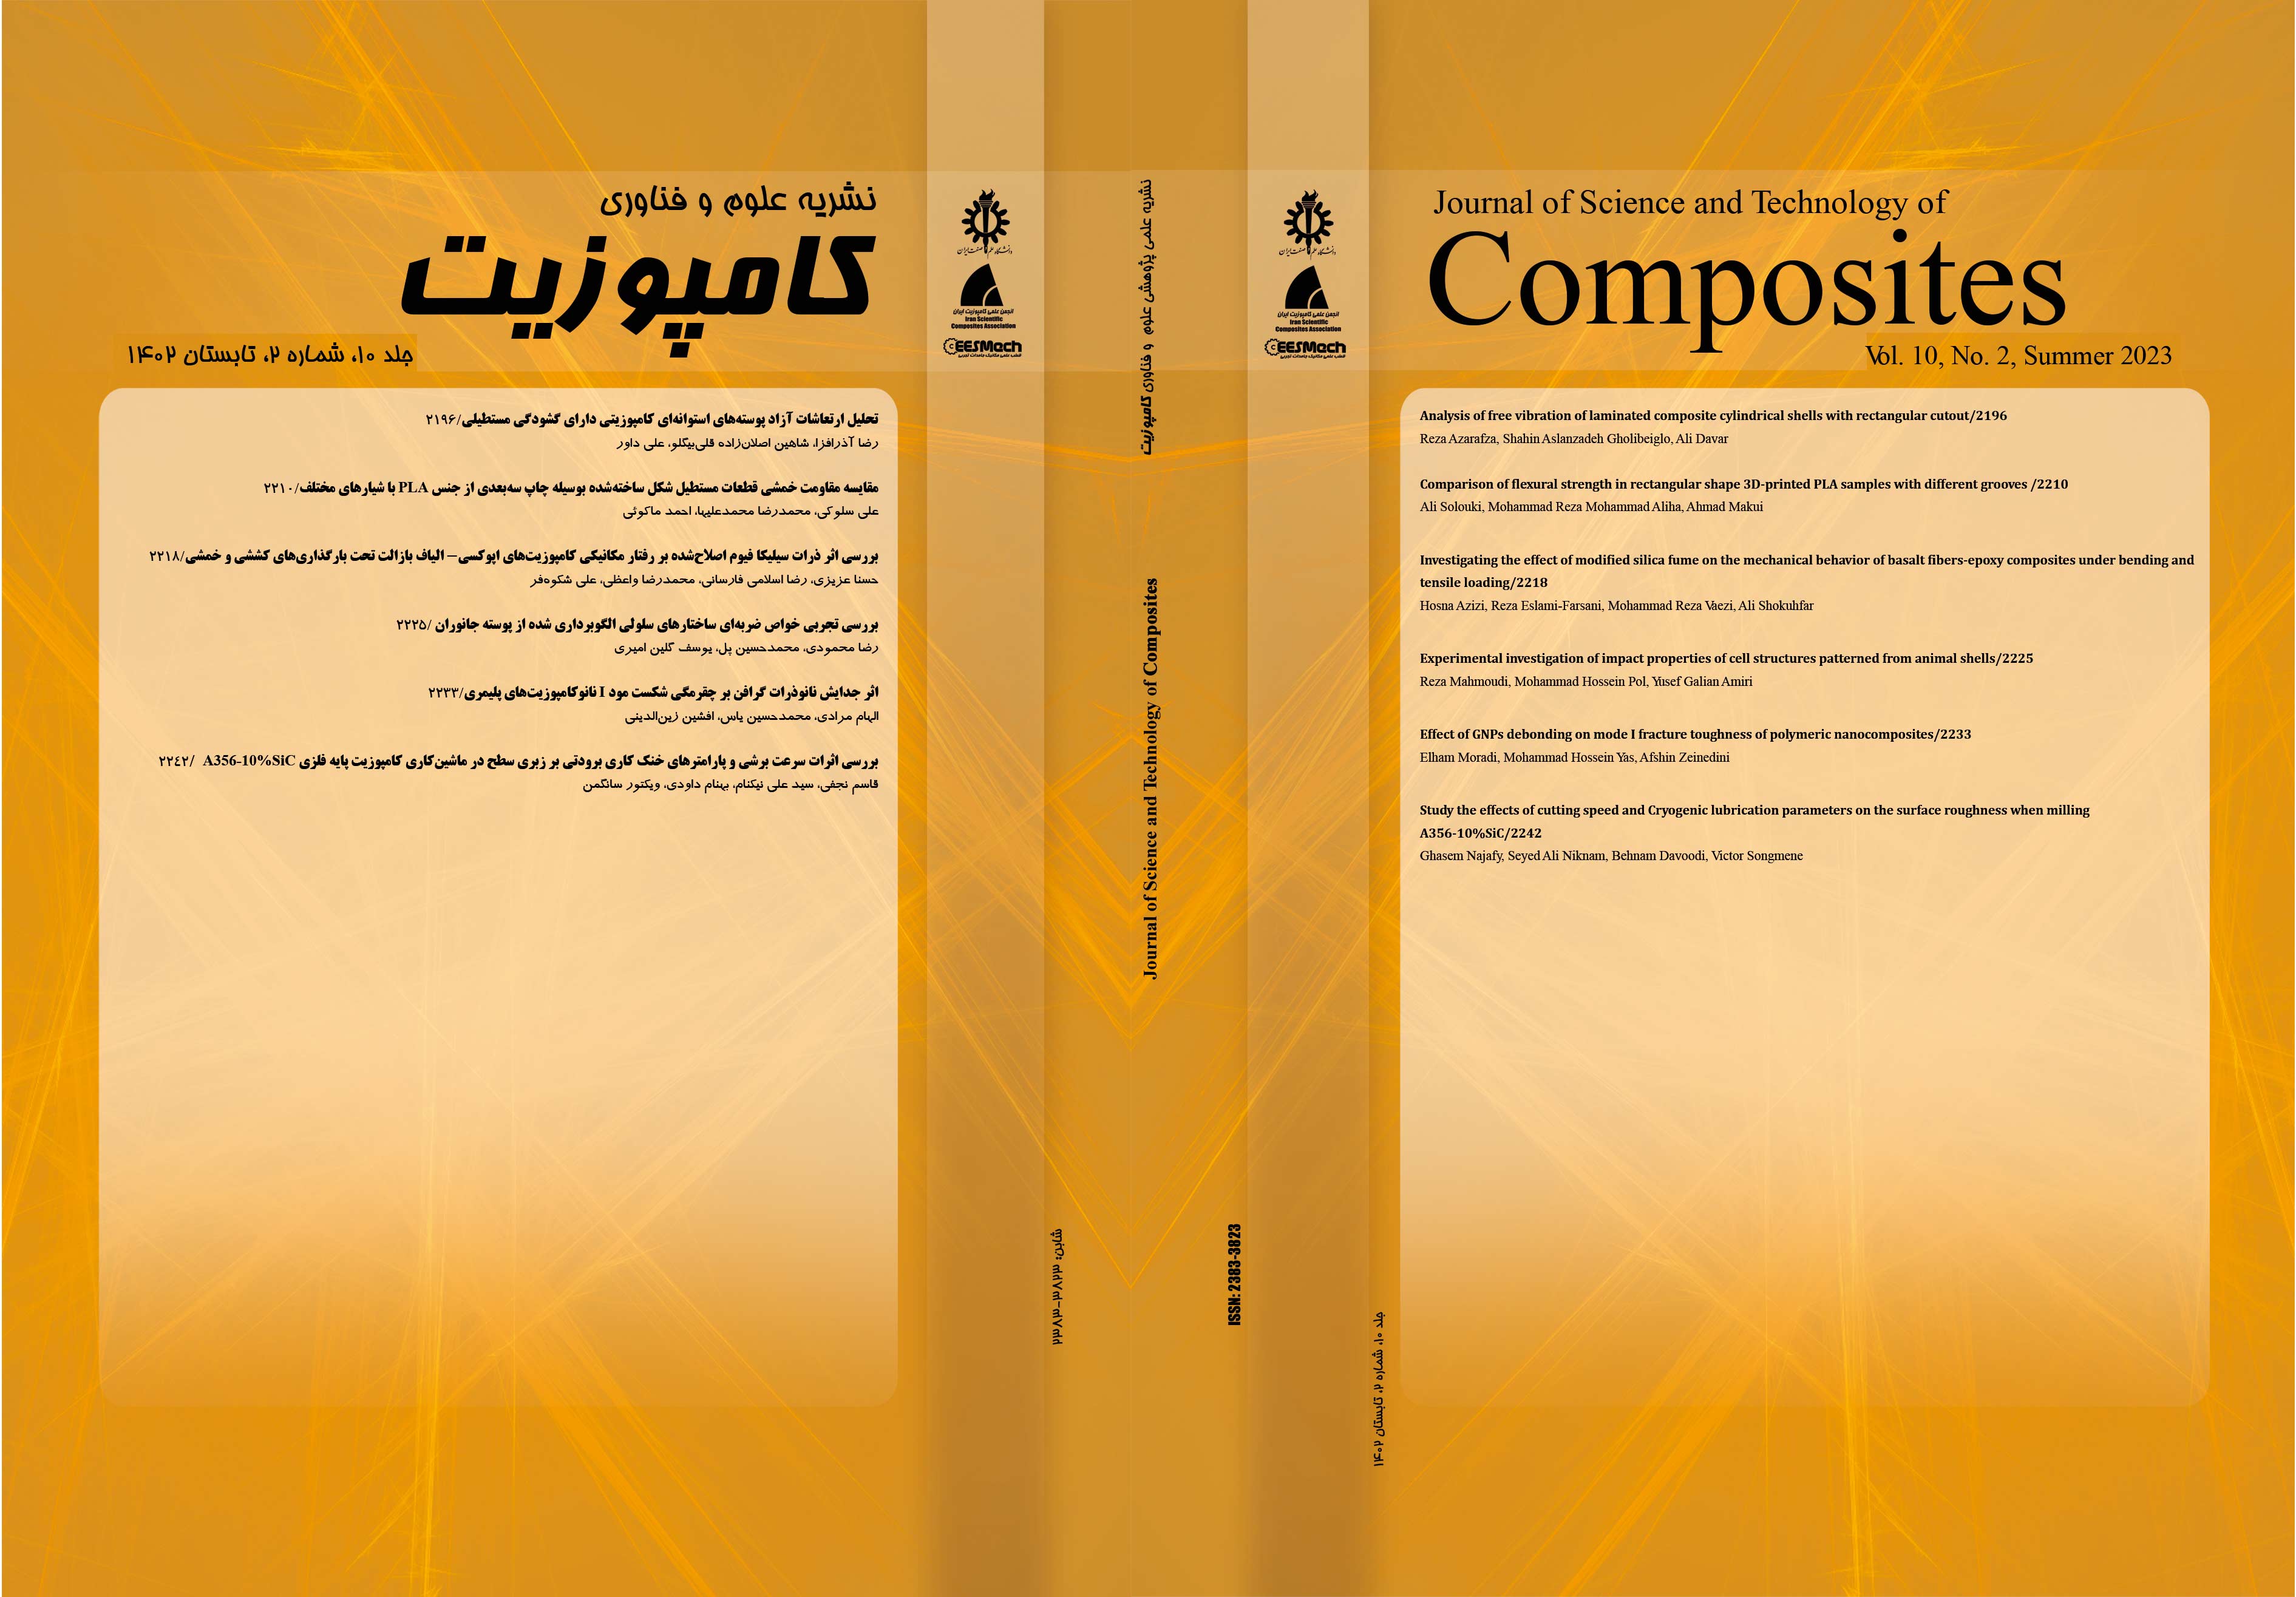 J. Compos. Sci., Free Full-Text